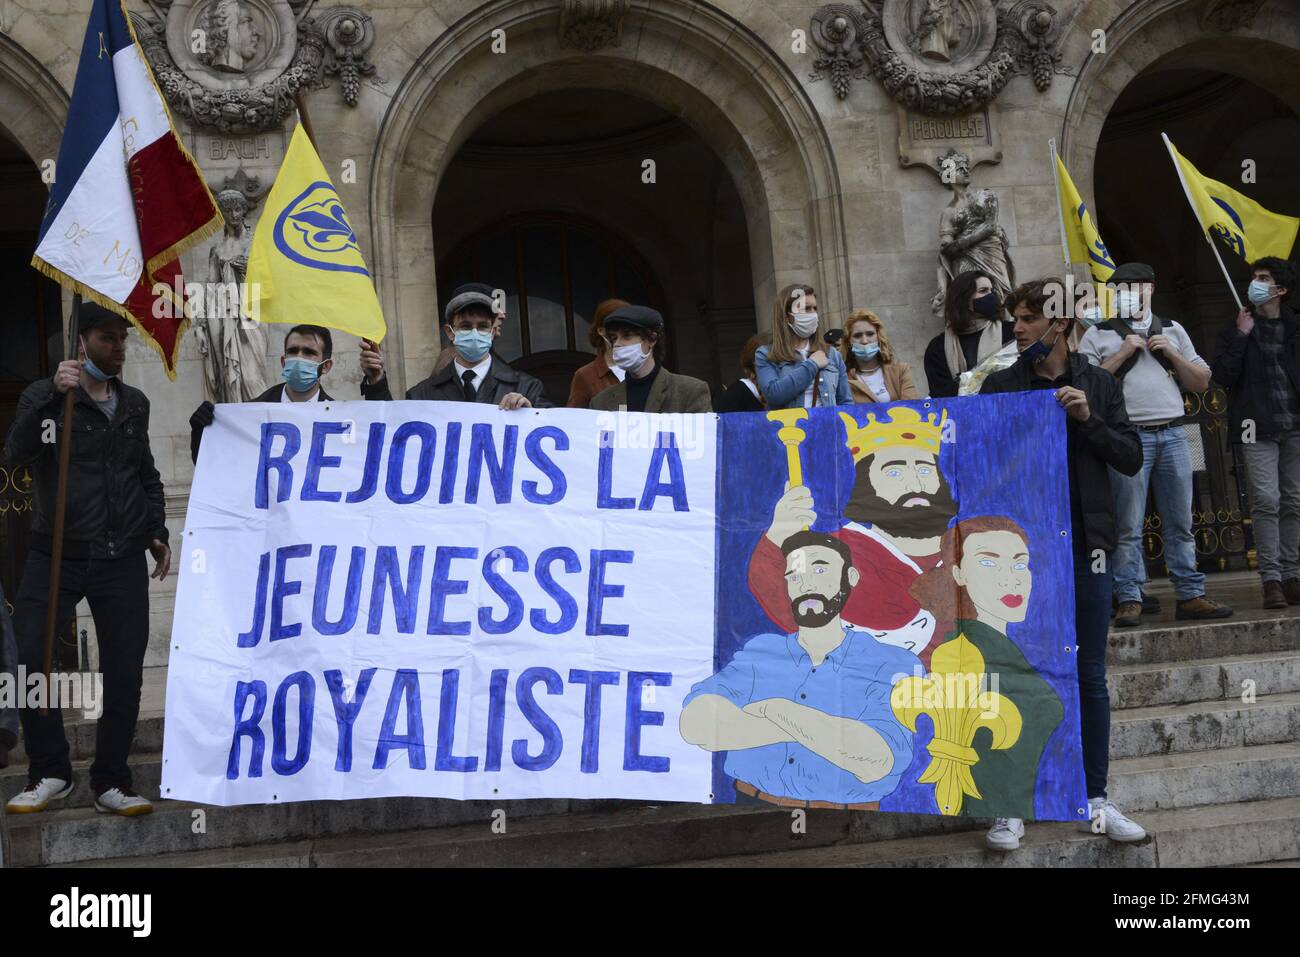 Several hundred royalist militants led by Action Francaise marched this  morning from the Opera to the statue of Joan of Arc in rue de Rivoli with  cries of 'everyone hates the republic', '